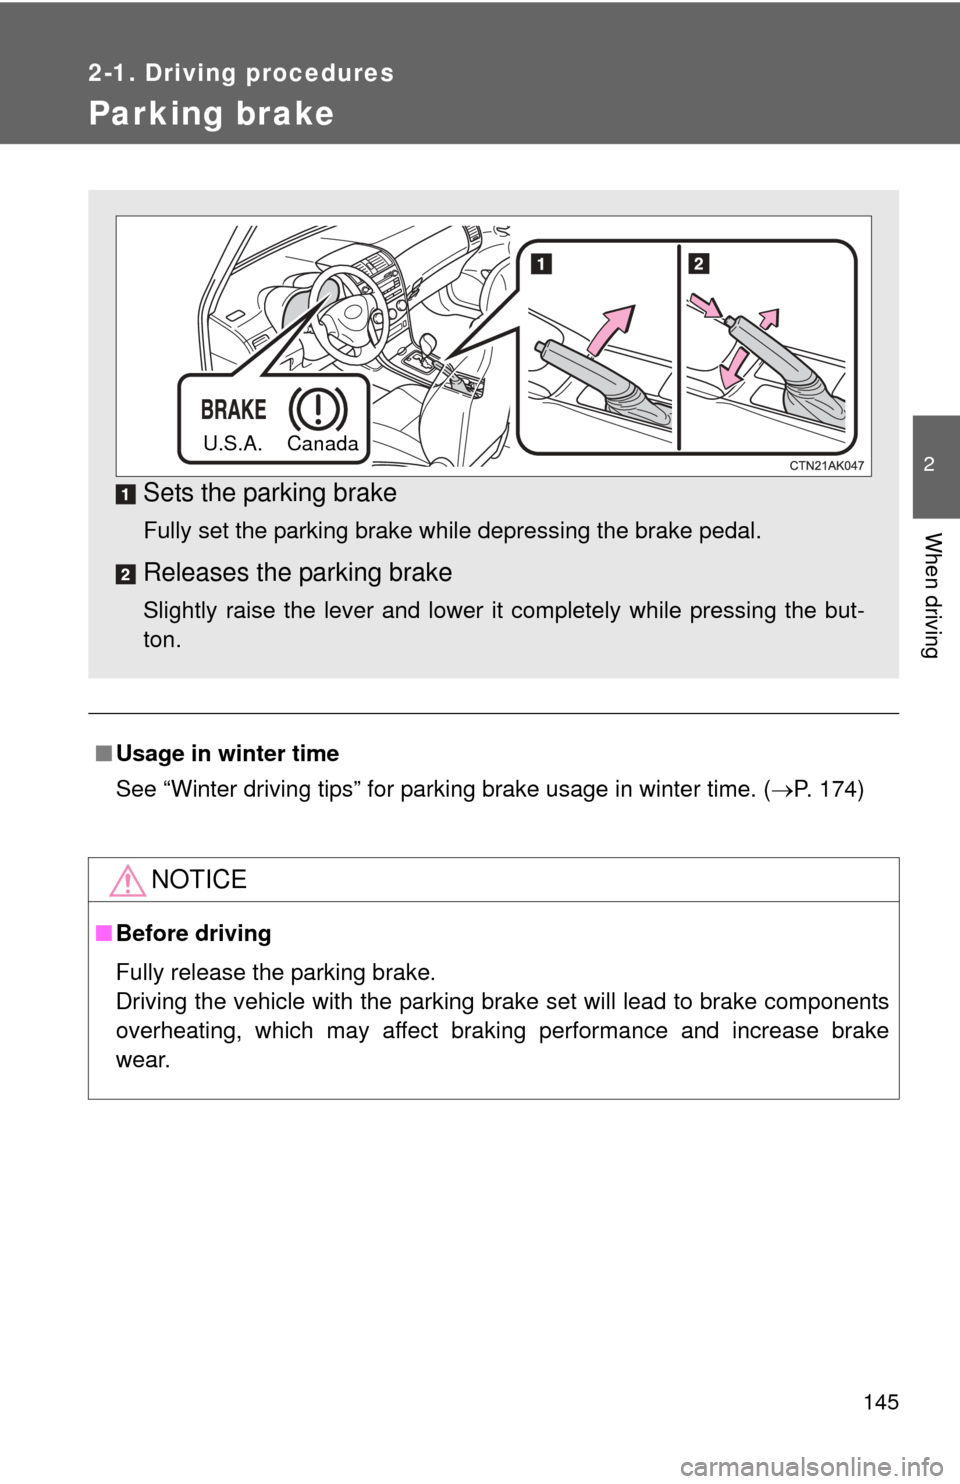 TOYOTA COROLLA 2011 10.G User Guide 145
2-1. Driving procedures
2
When driving
Parking brake
■Usage in winter time
See “Winter driving tips” for parking brake usage in winter time. (P. 174)
NOTICE
■Before driving
Fully releas